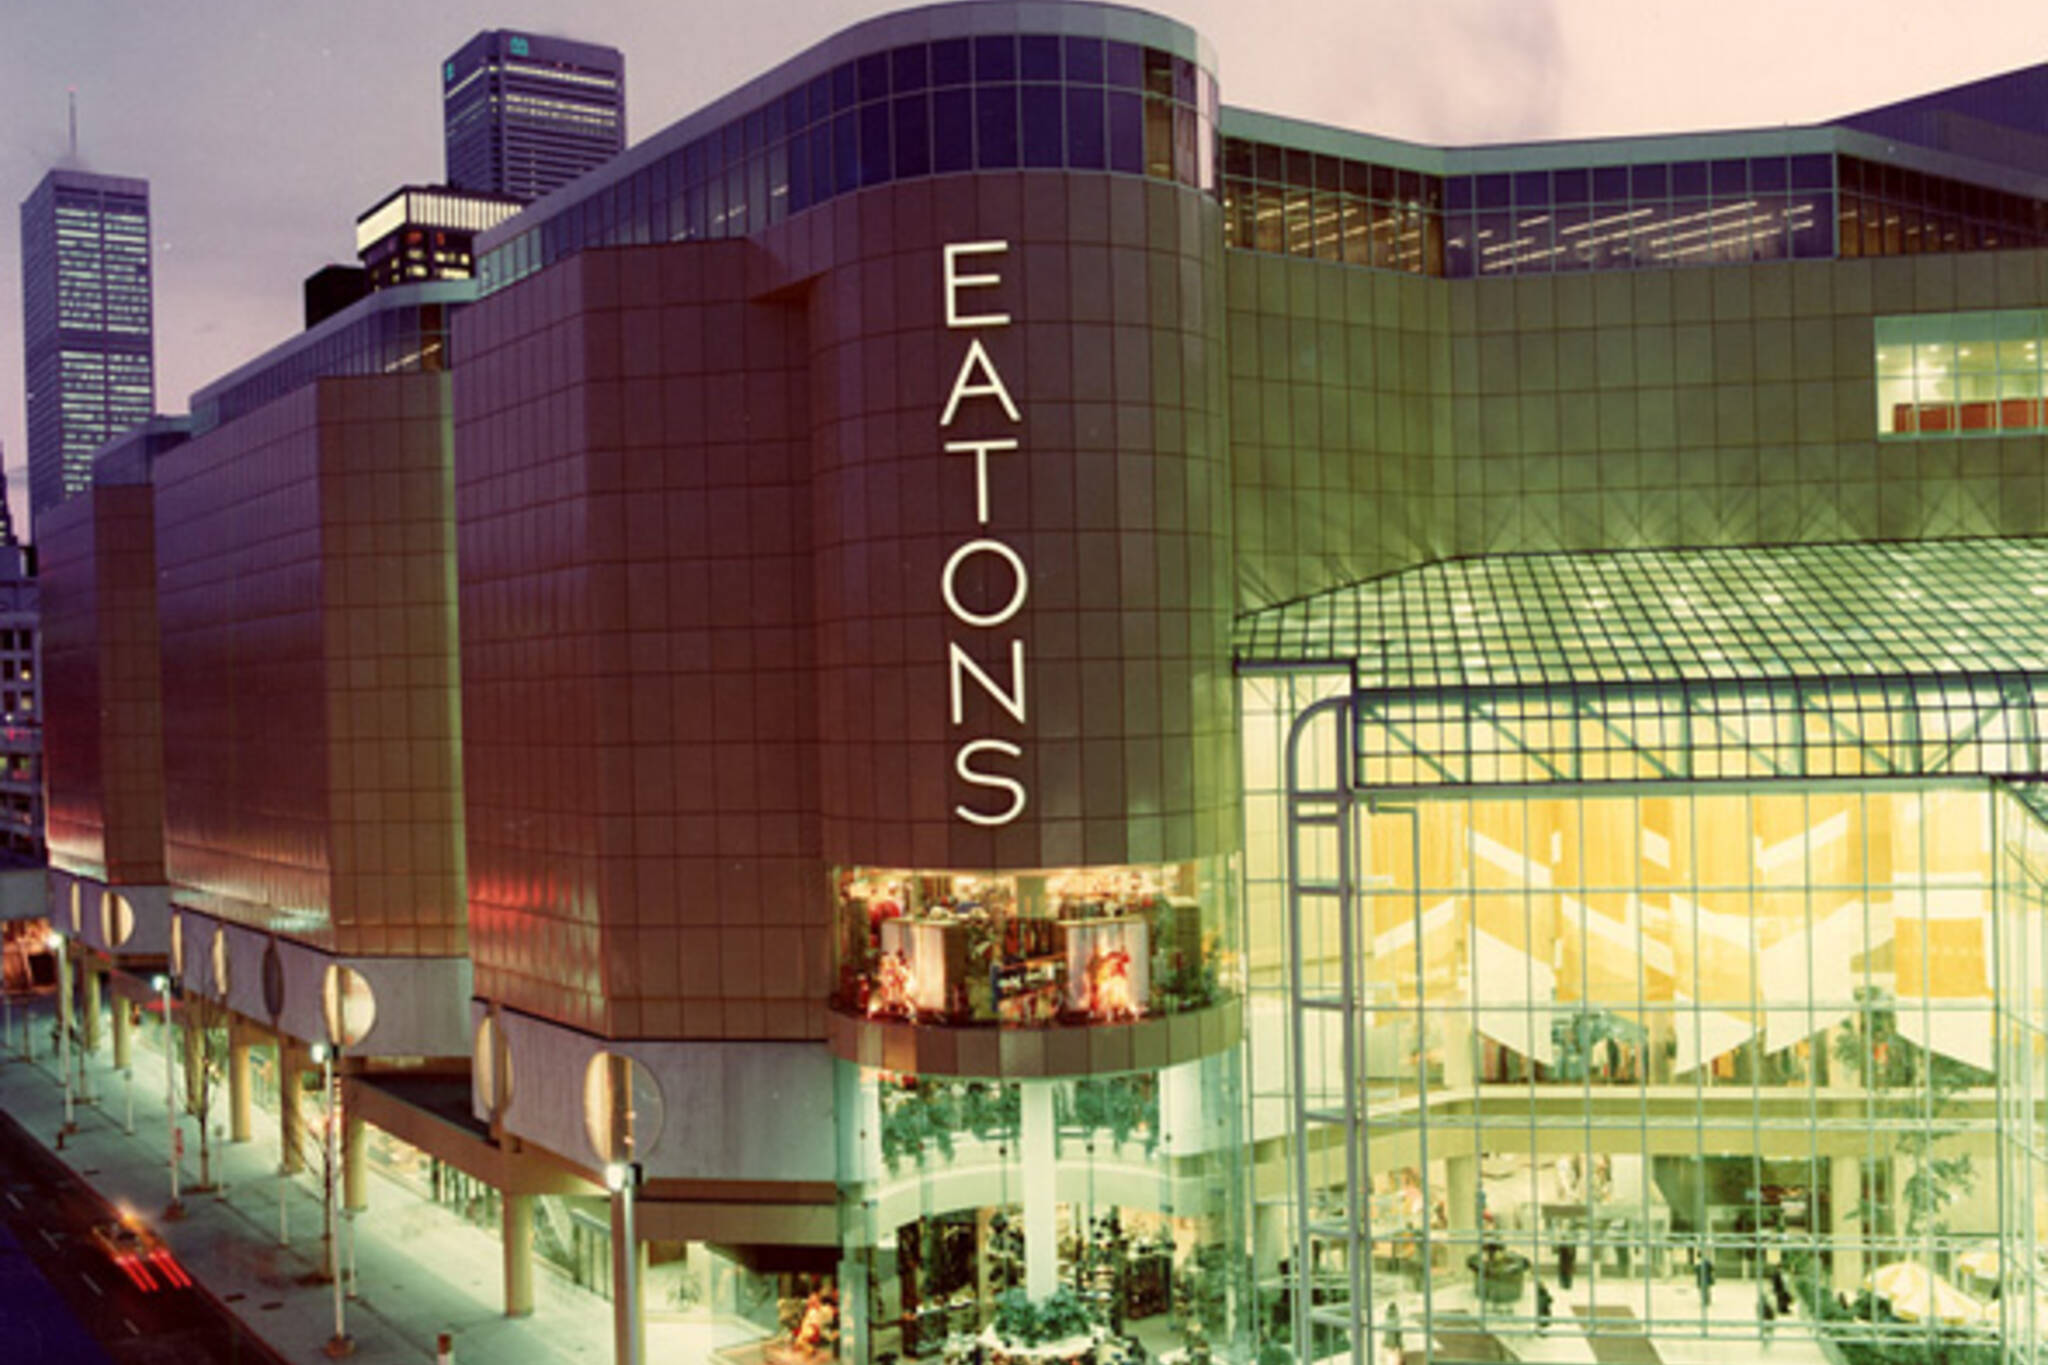 The Eaton Centre turns 35 years old